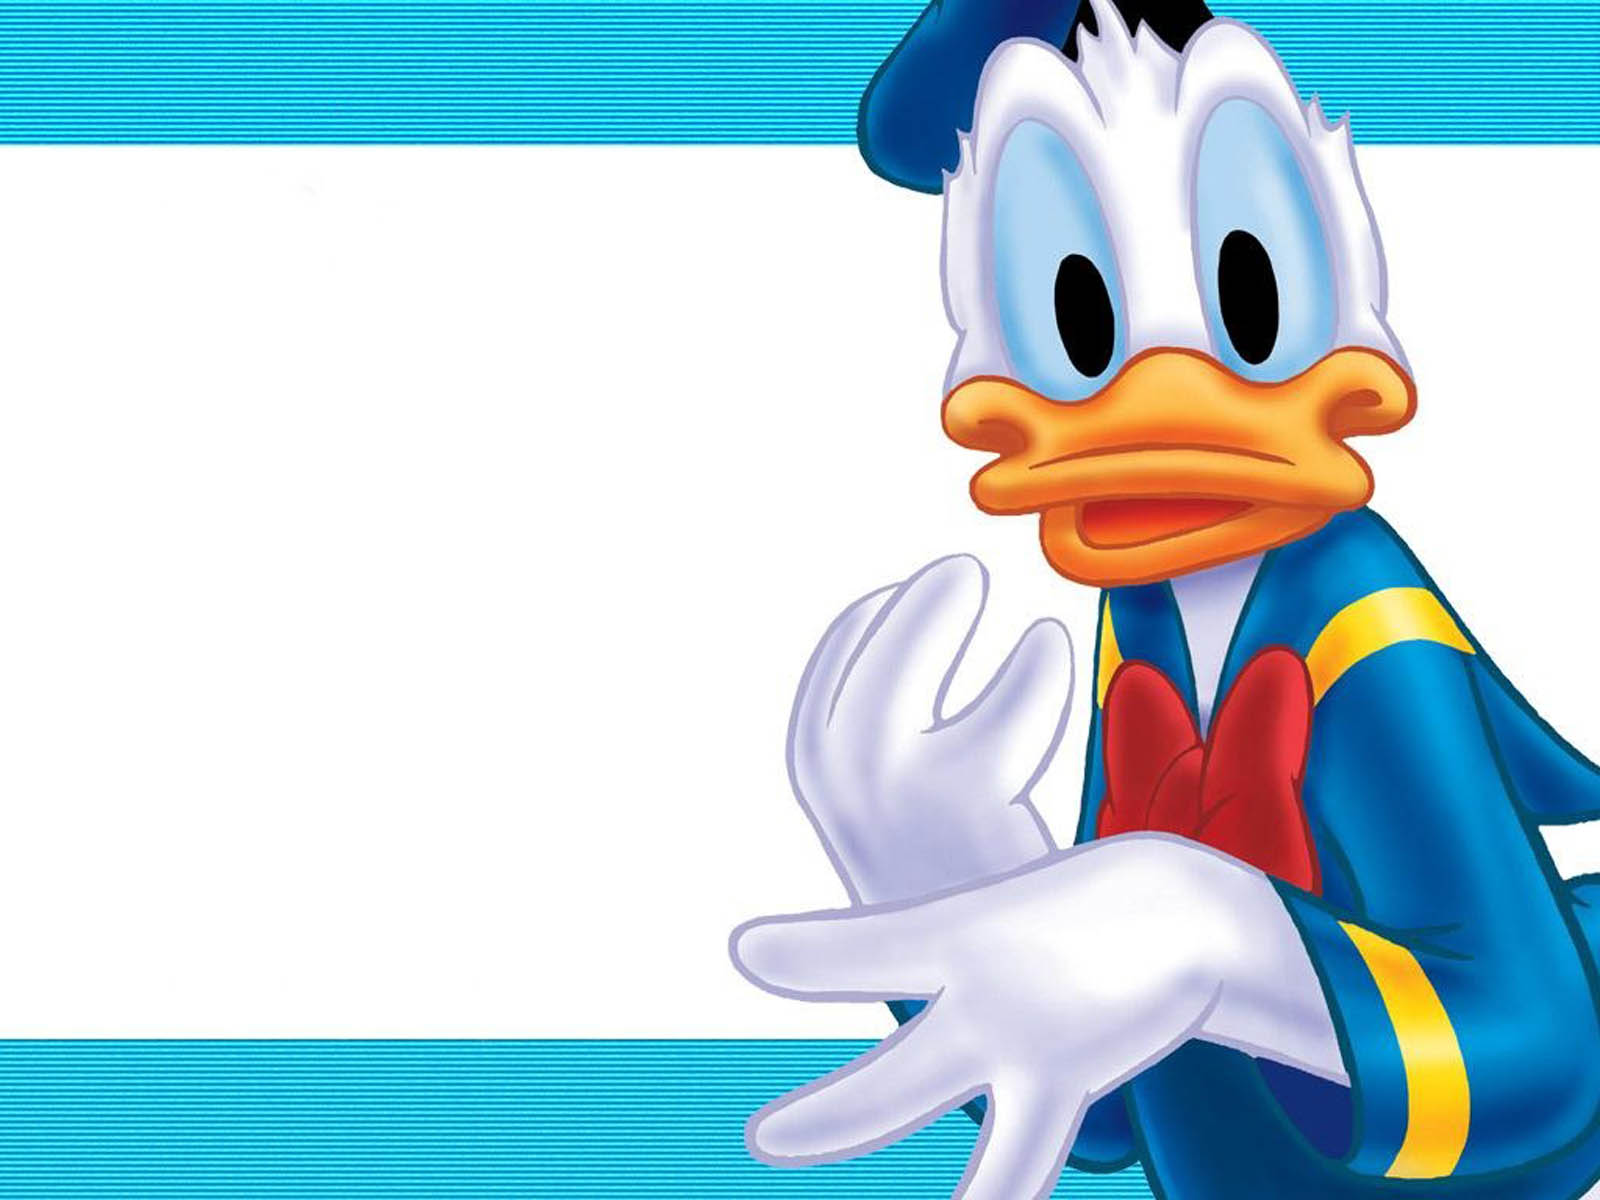 Donald Duck Wallpaper Image Photos Pictures And Background For